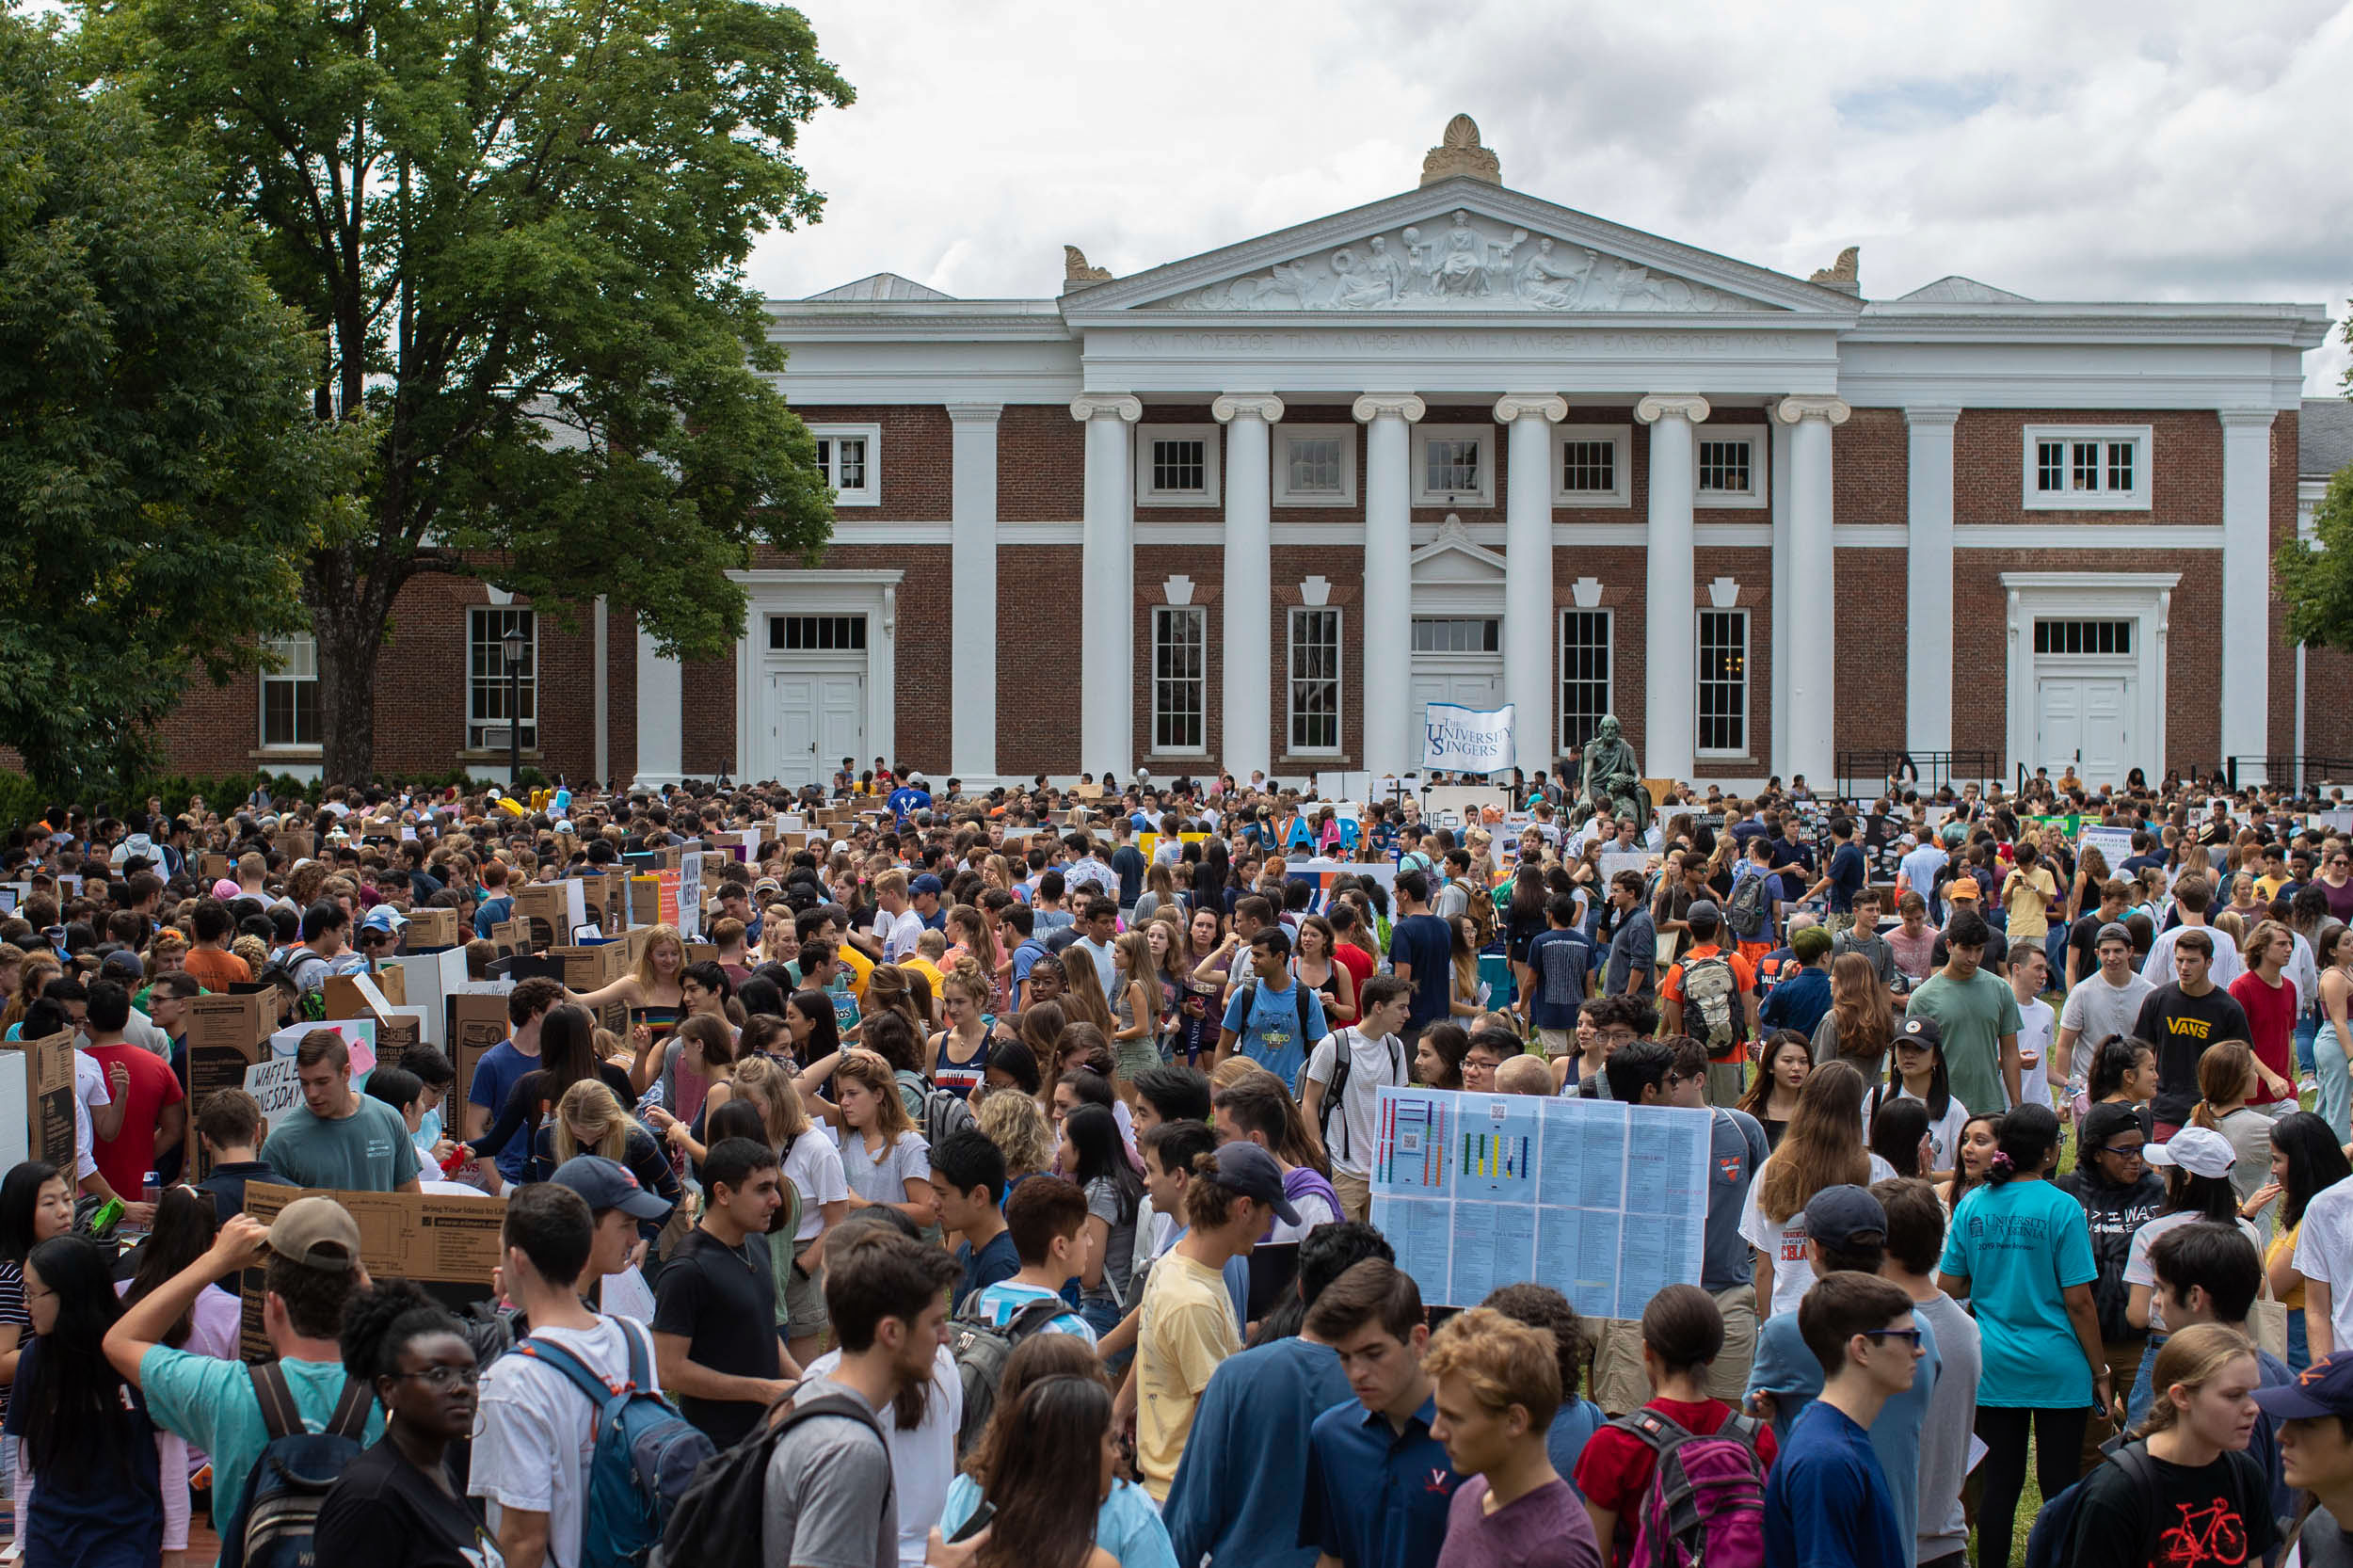 Thousands of students cover the lawn as they look at the booths of clubs and organizations they can join